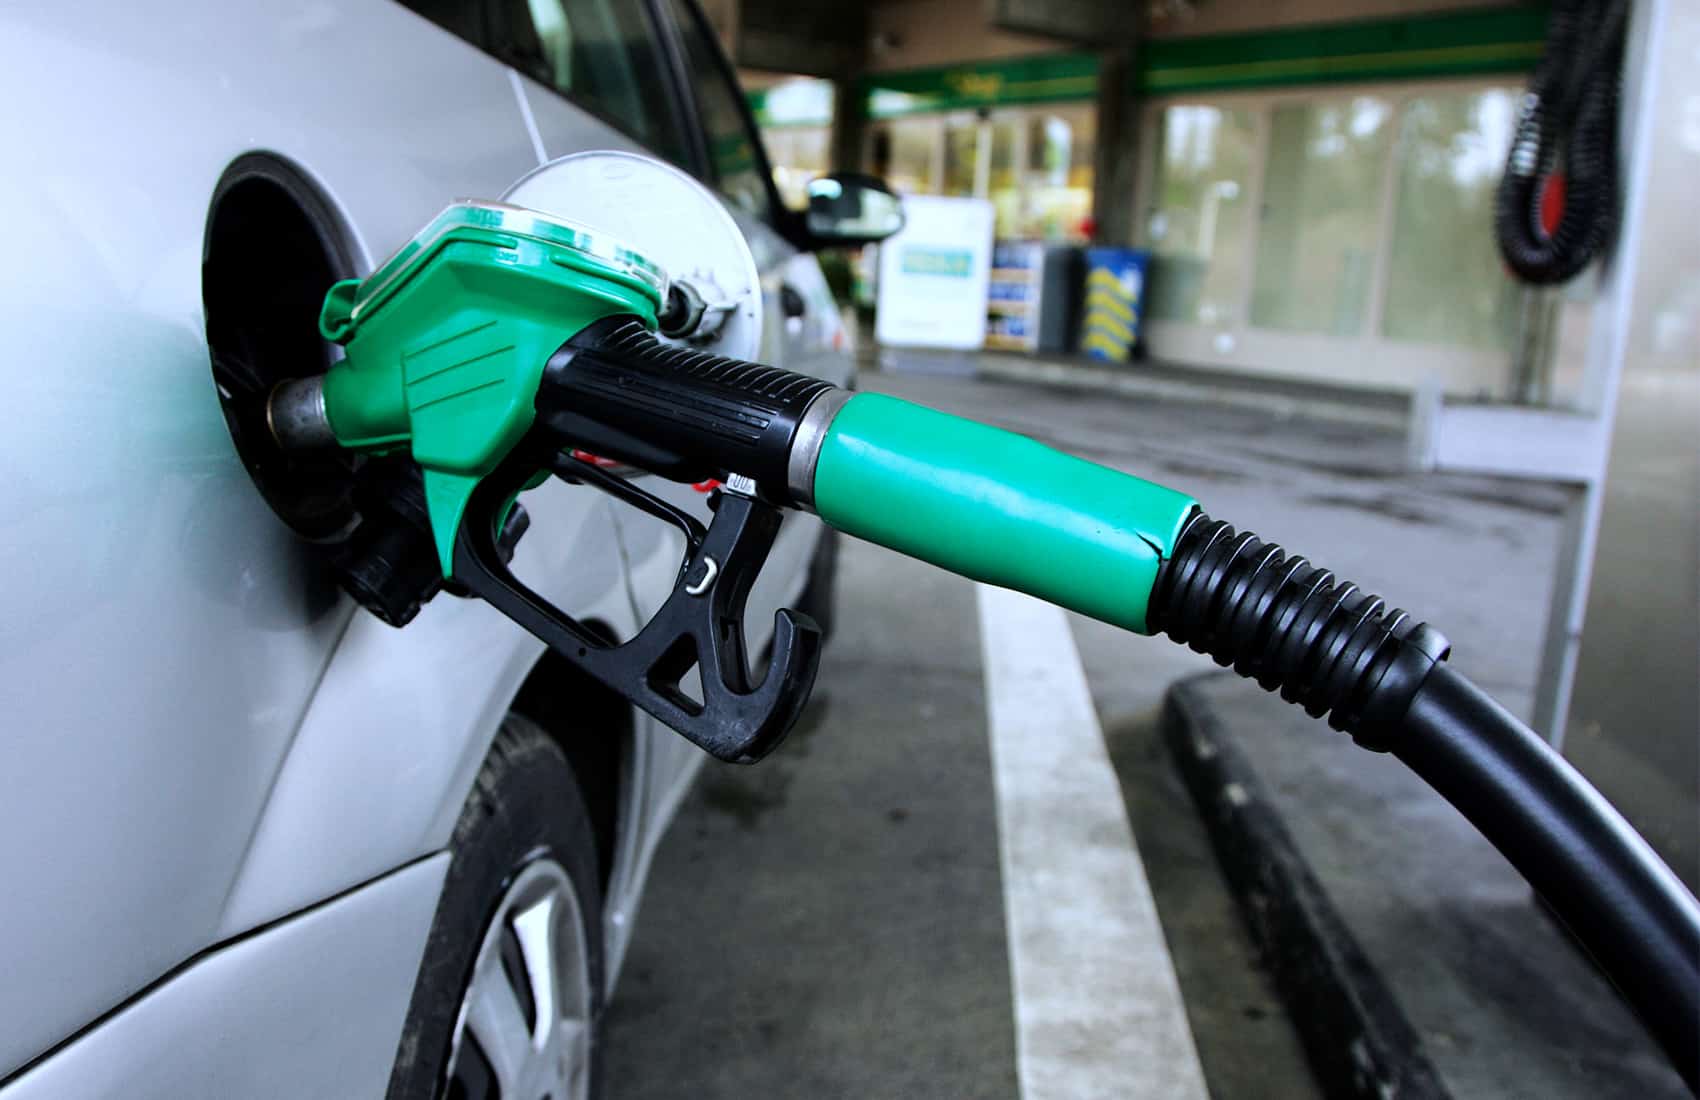 Good news for motorists: ARESEP has approved the third cut in fuel prices this year.